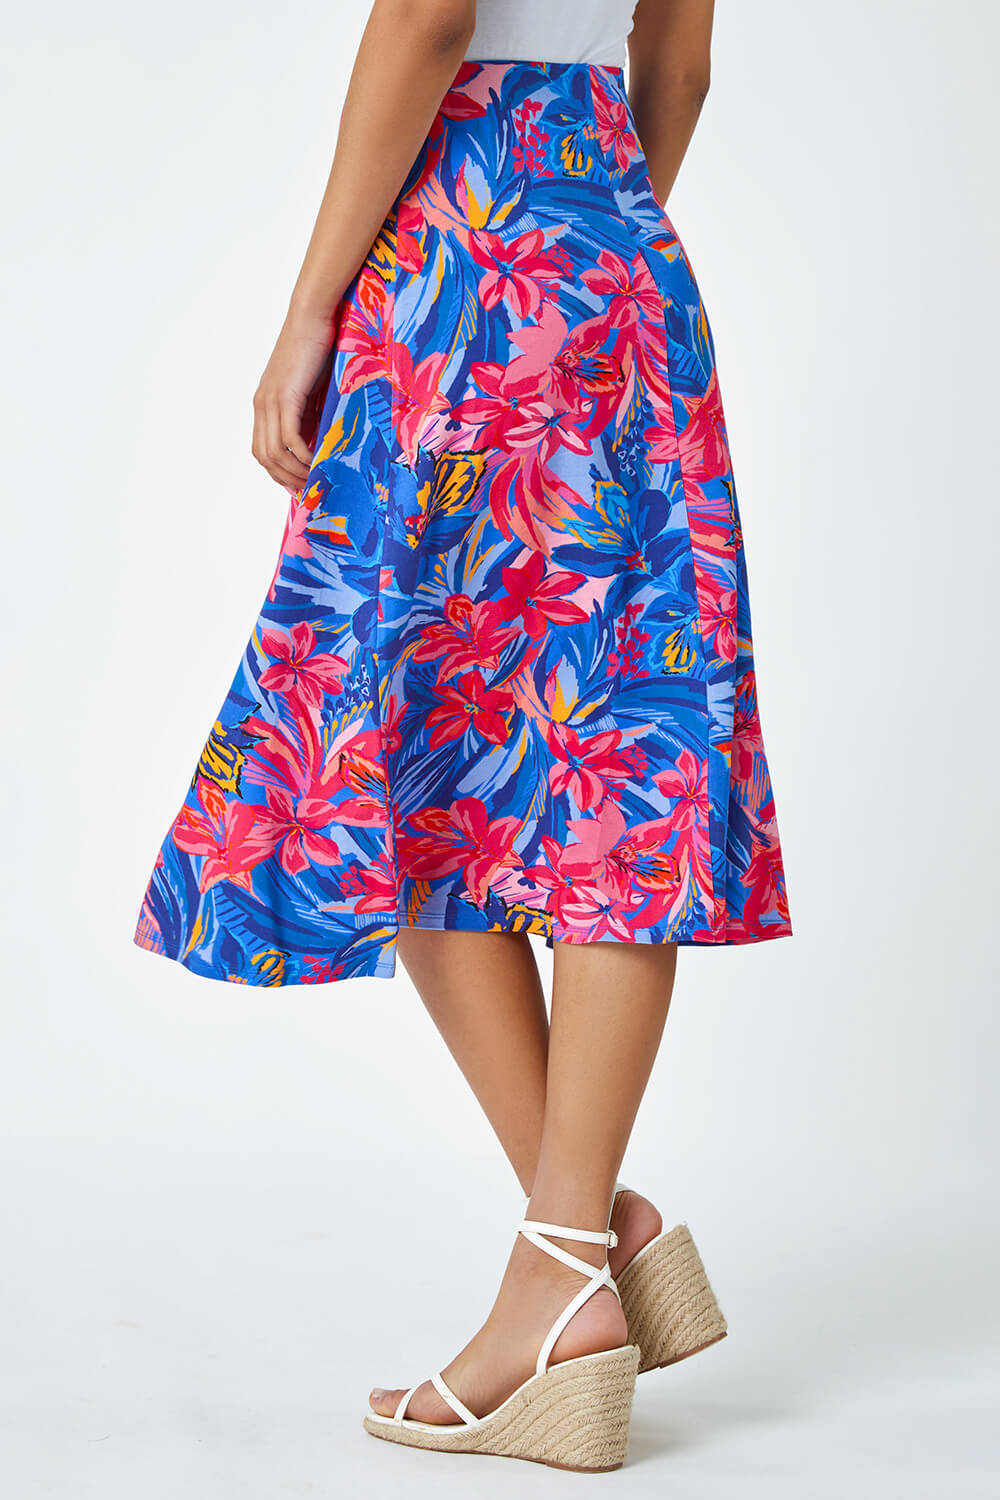 Blue Tropical Floral Stretch Panel Skirt, Image 3 of 5